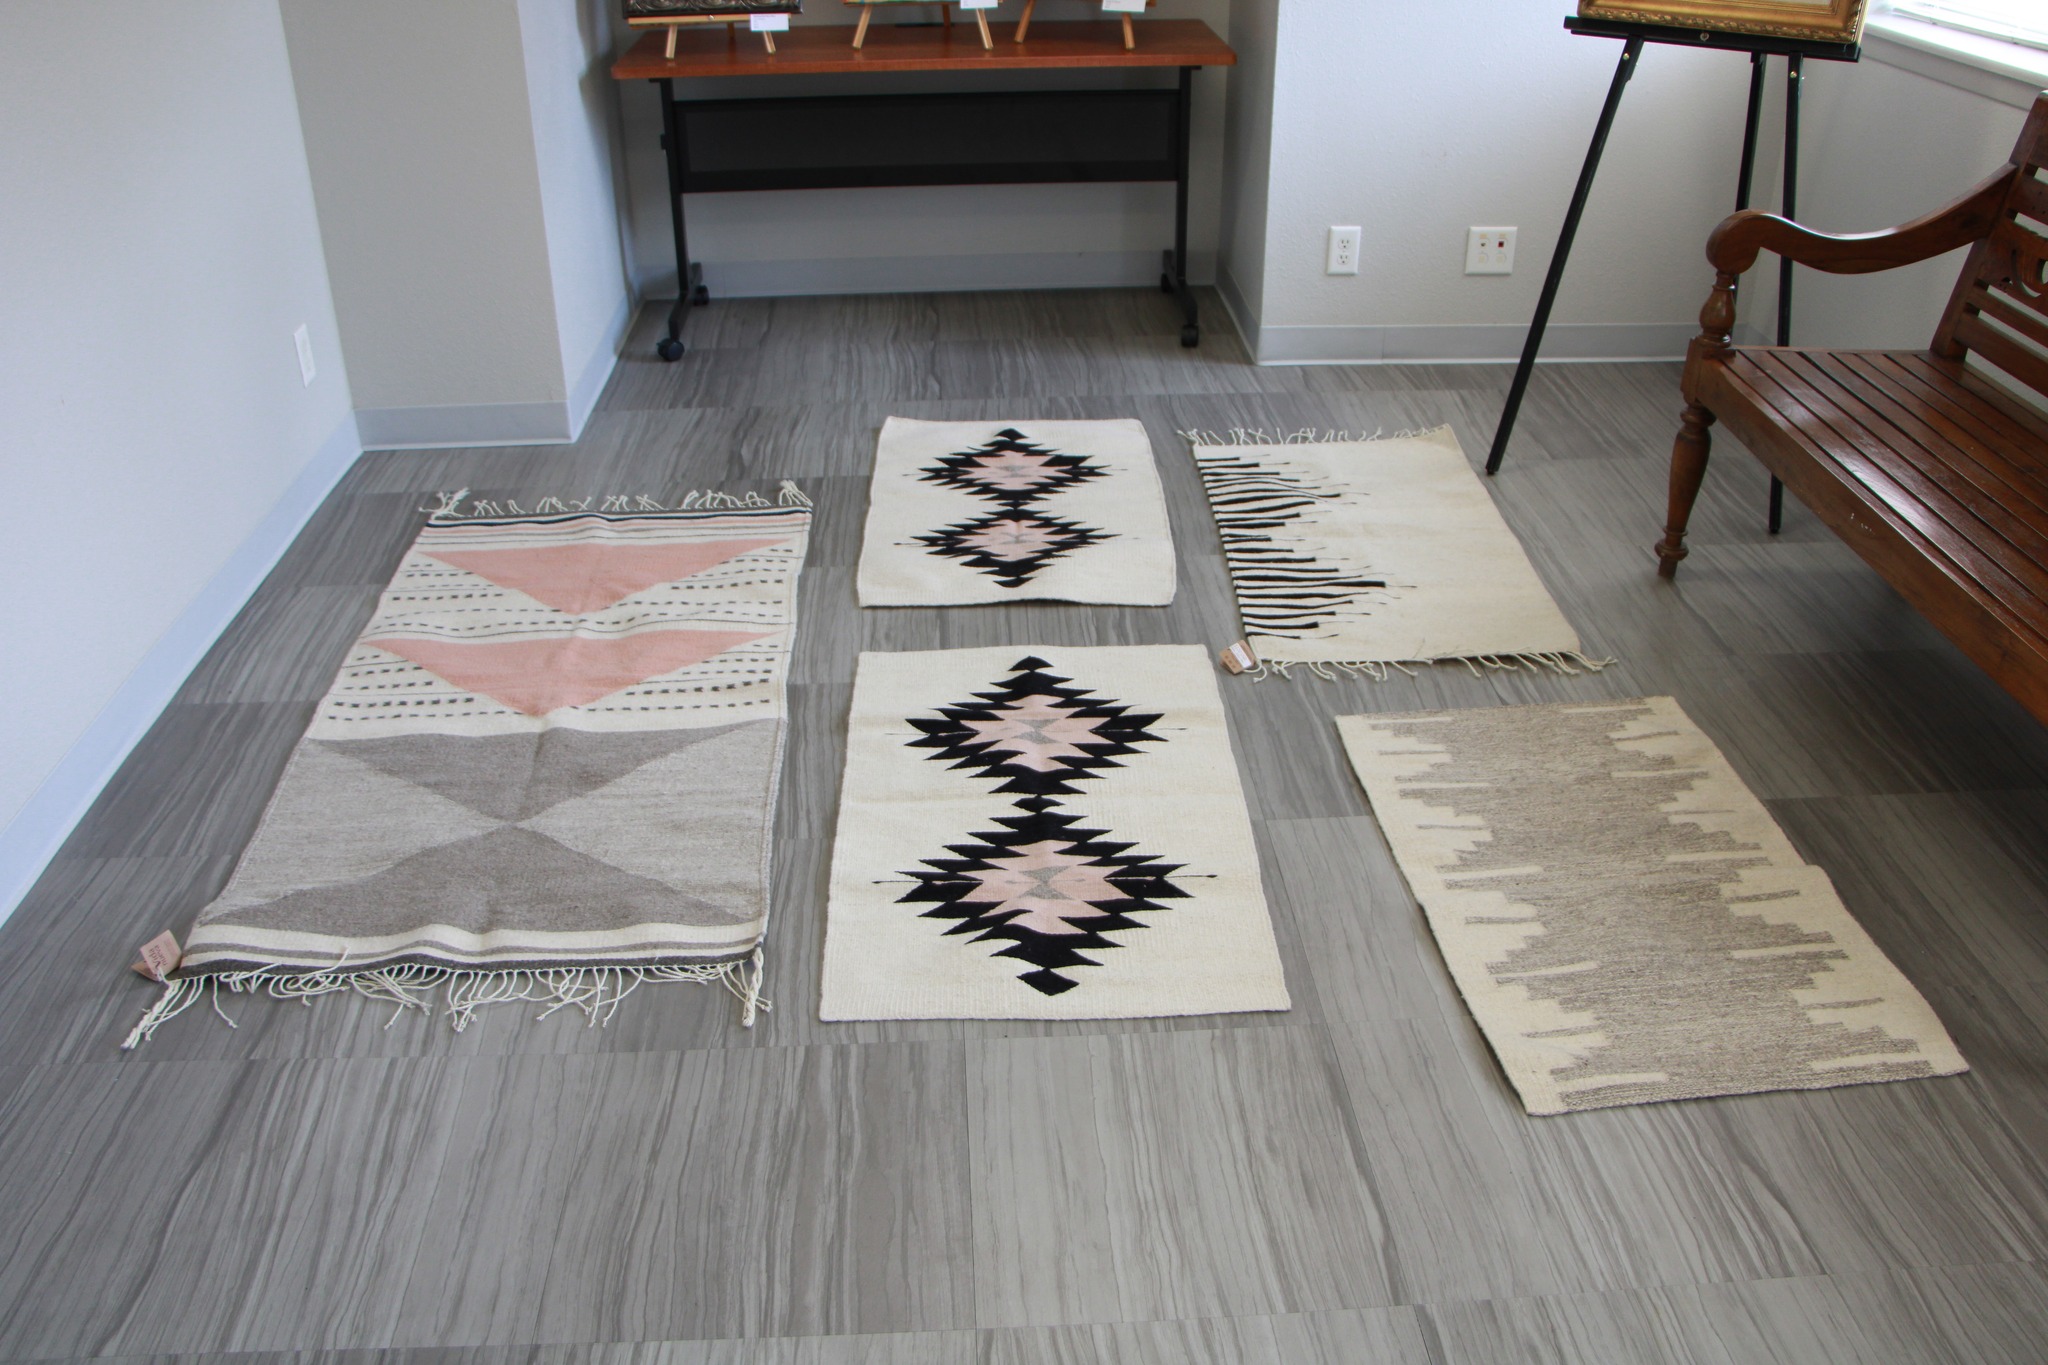 5 handmade, woven rugs lay arranged on the floor, all with various indigenous patterns.